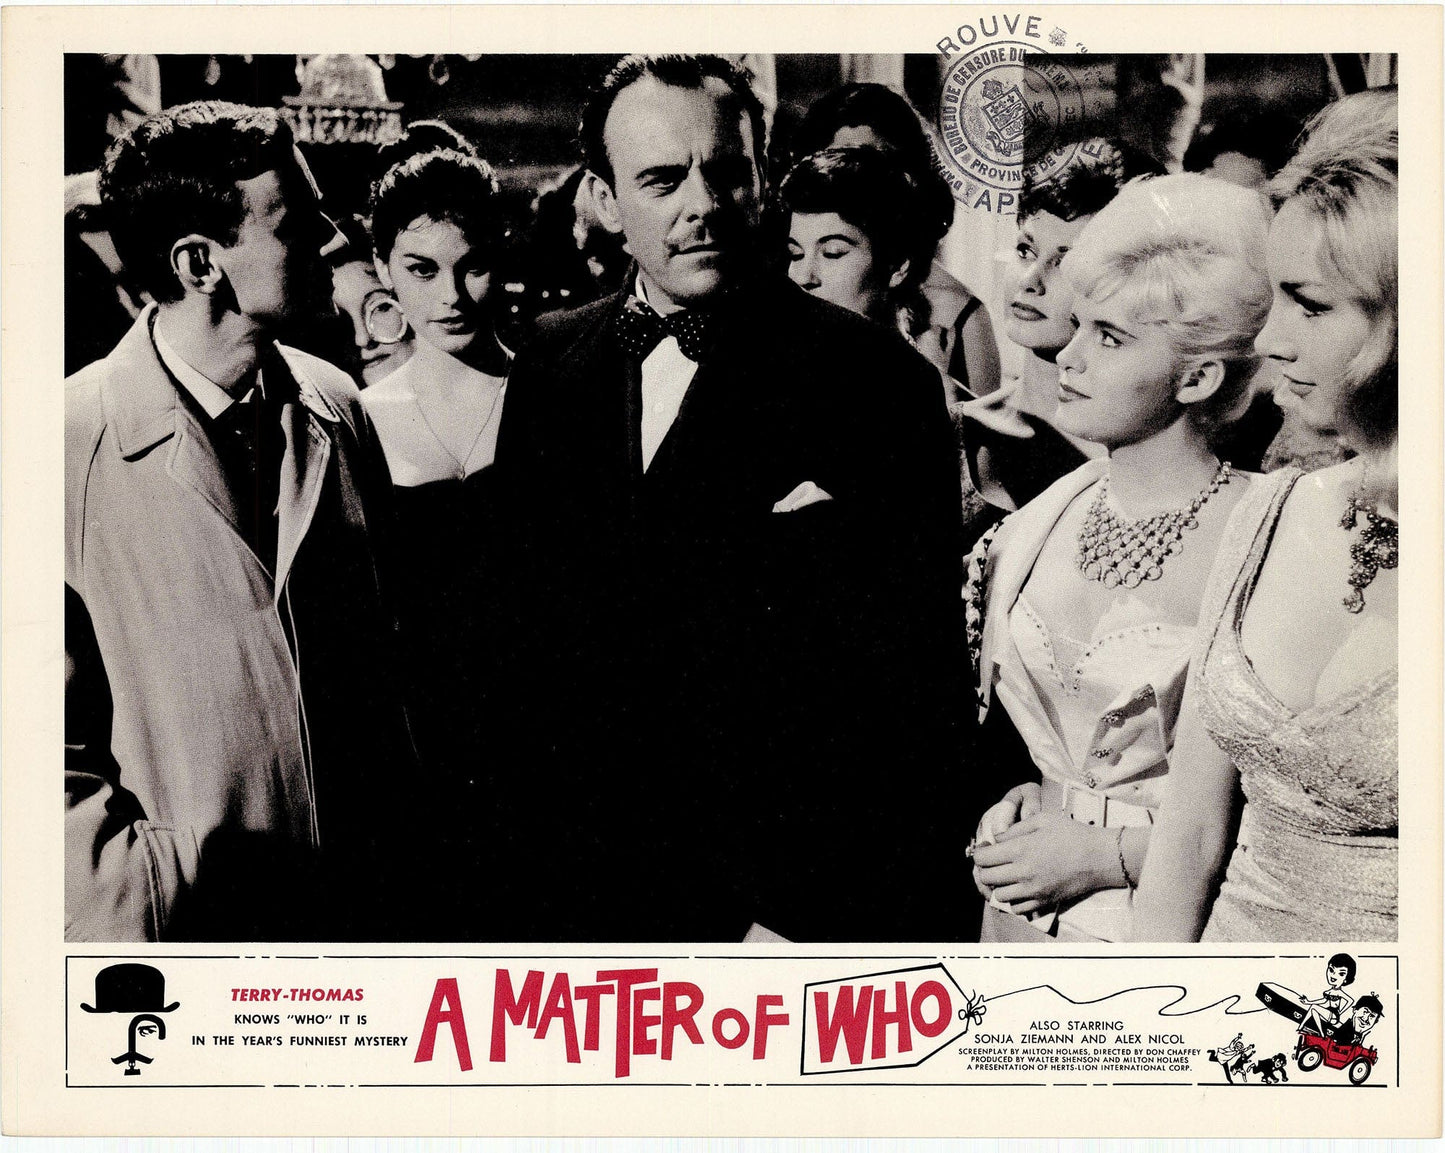 A Matter of WHO Movie Lobby Card